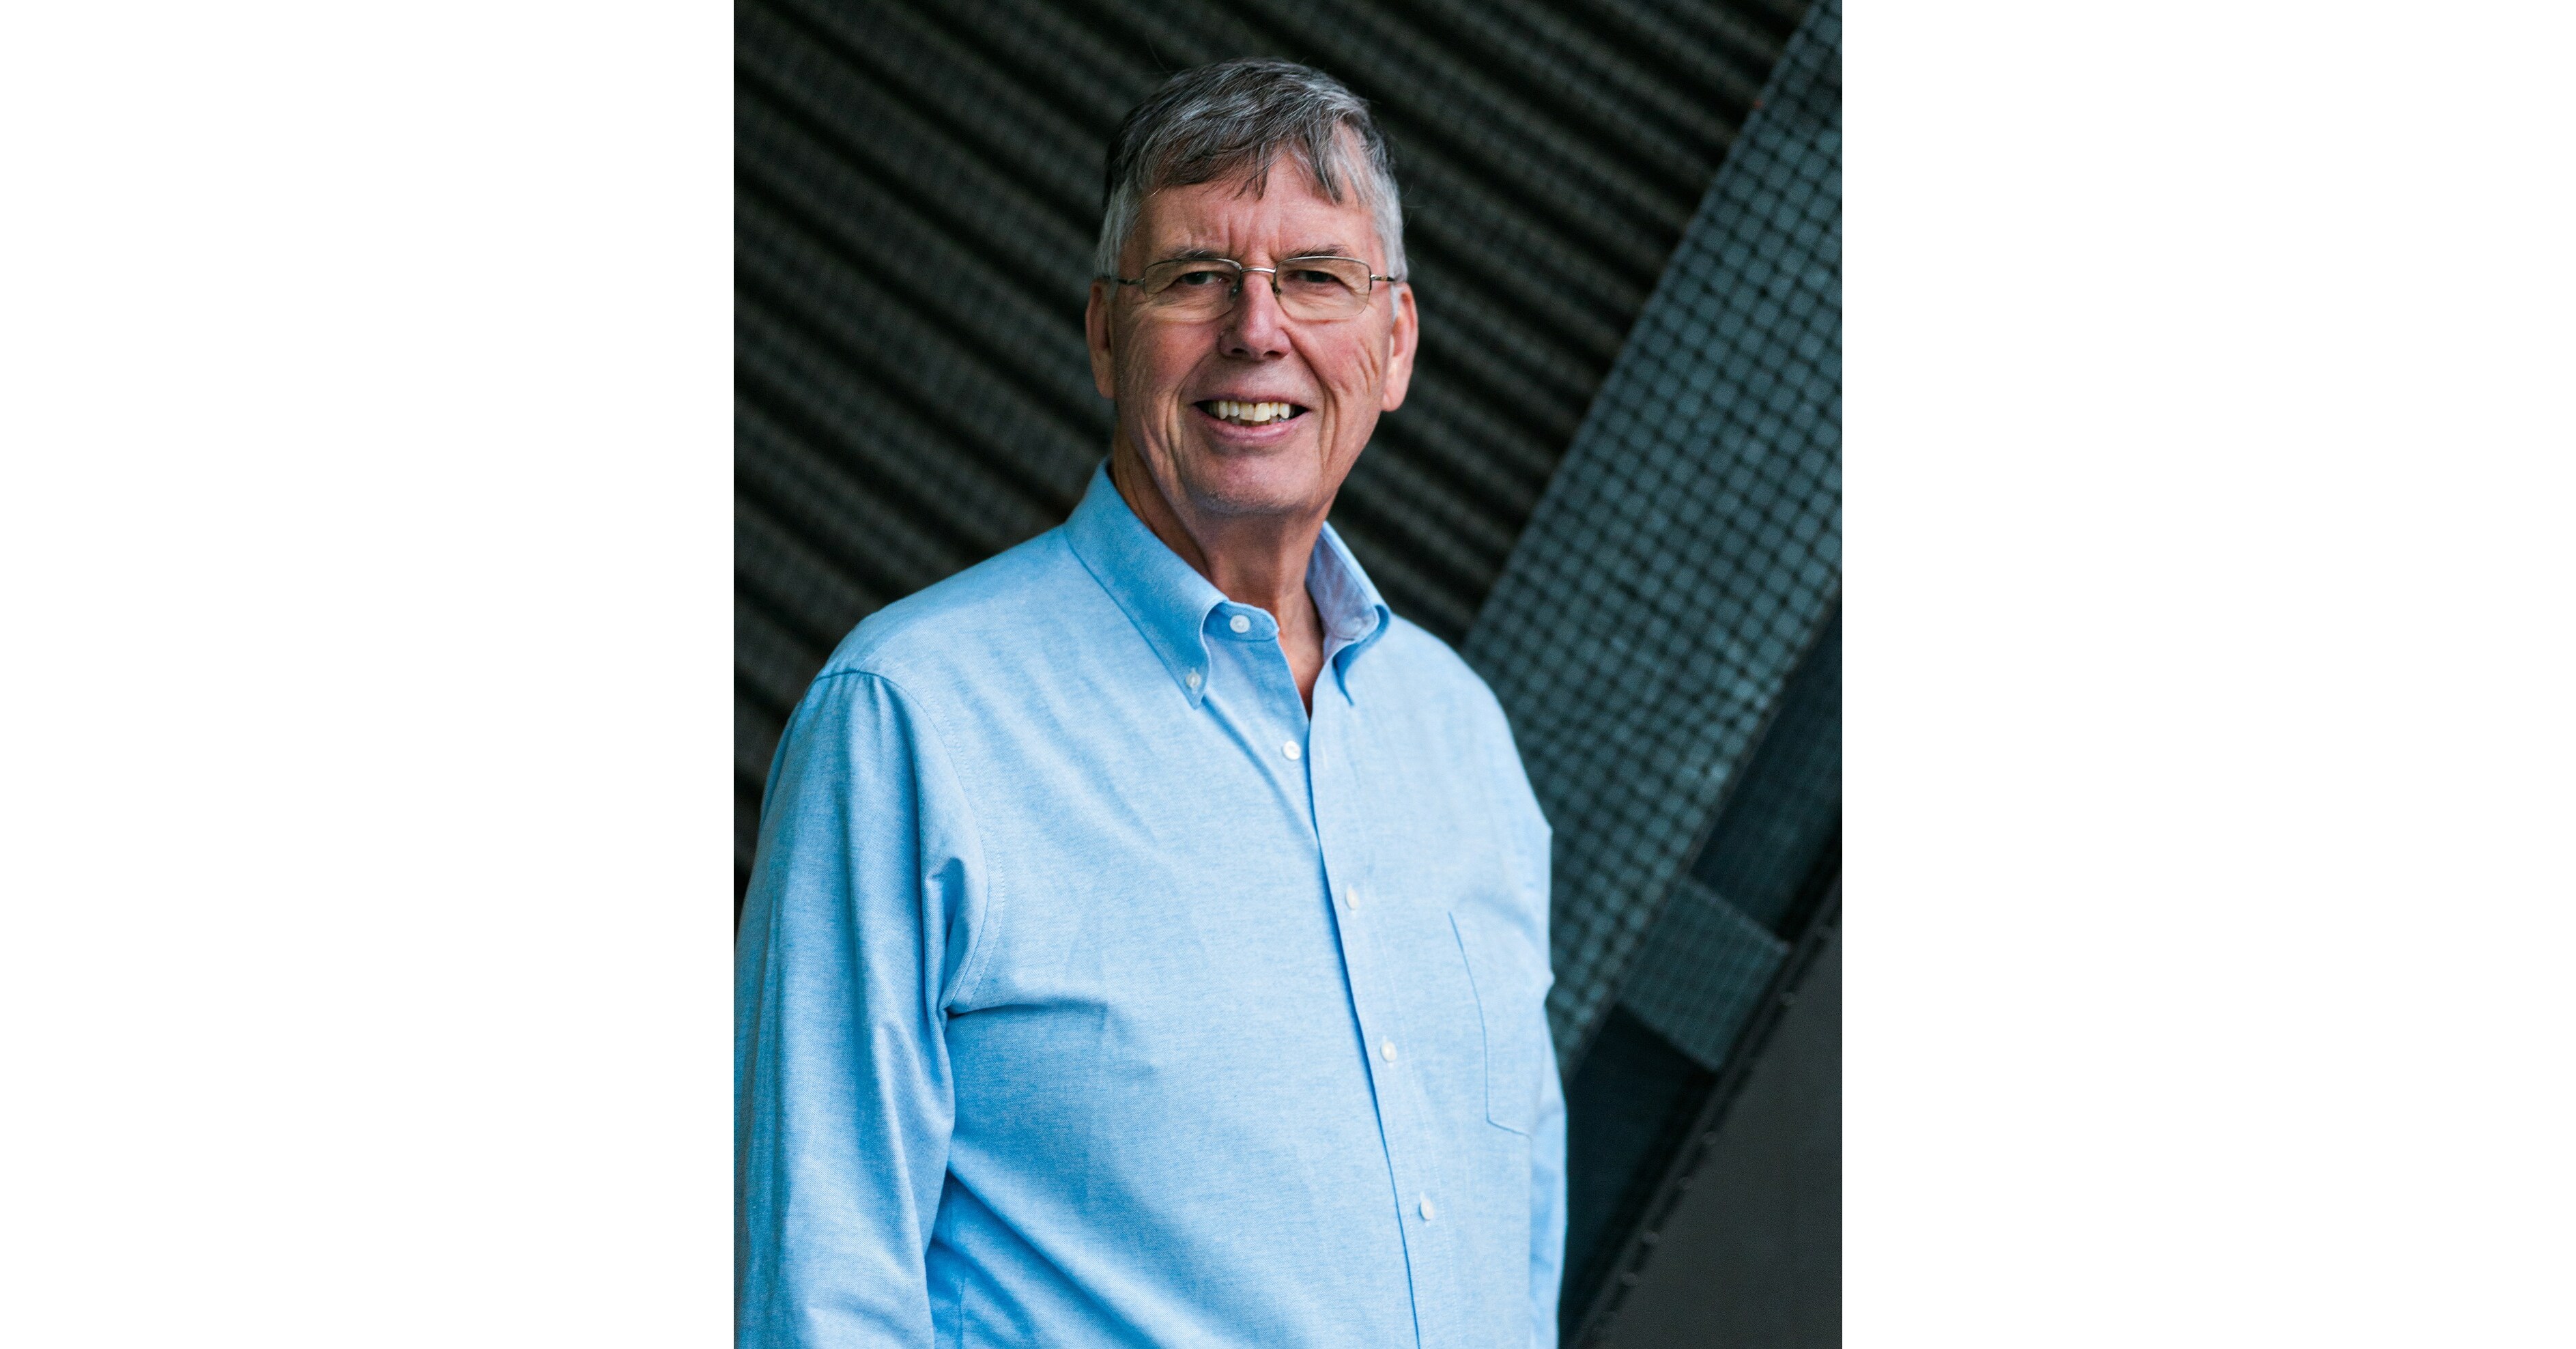 Technology pioneer Mike Stonebraker raises .5M to launch DBOS and radically transform cloud computing